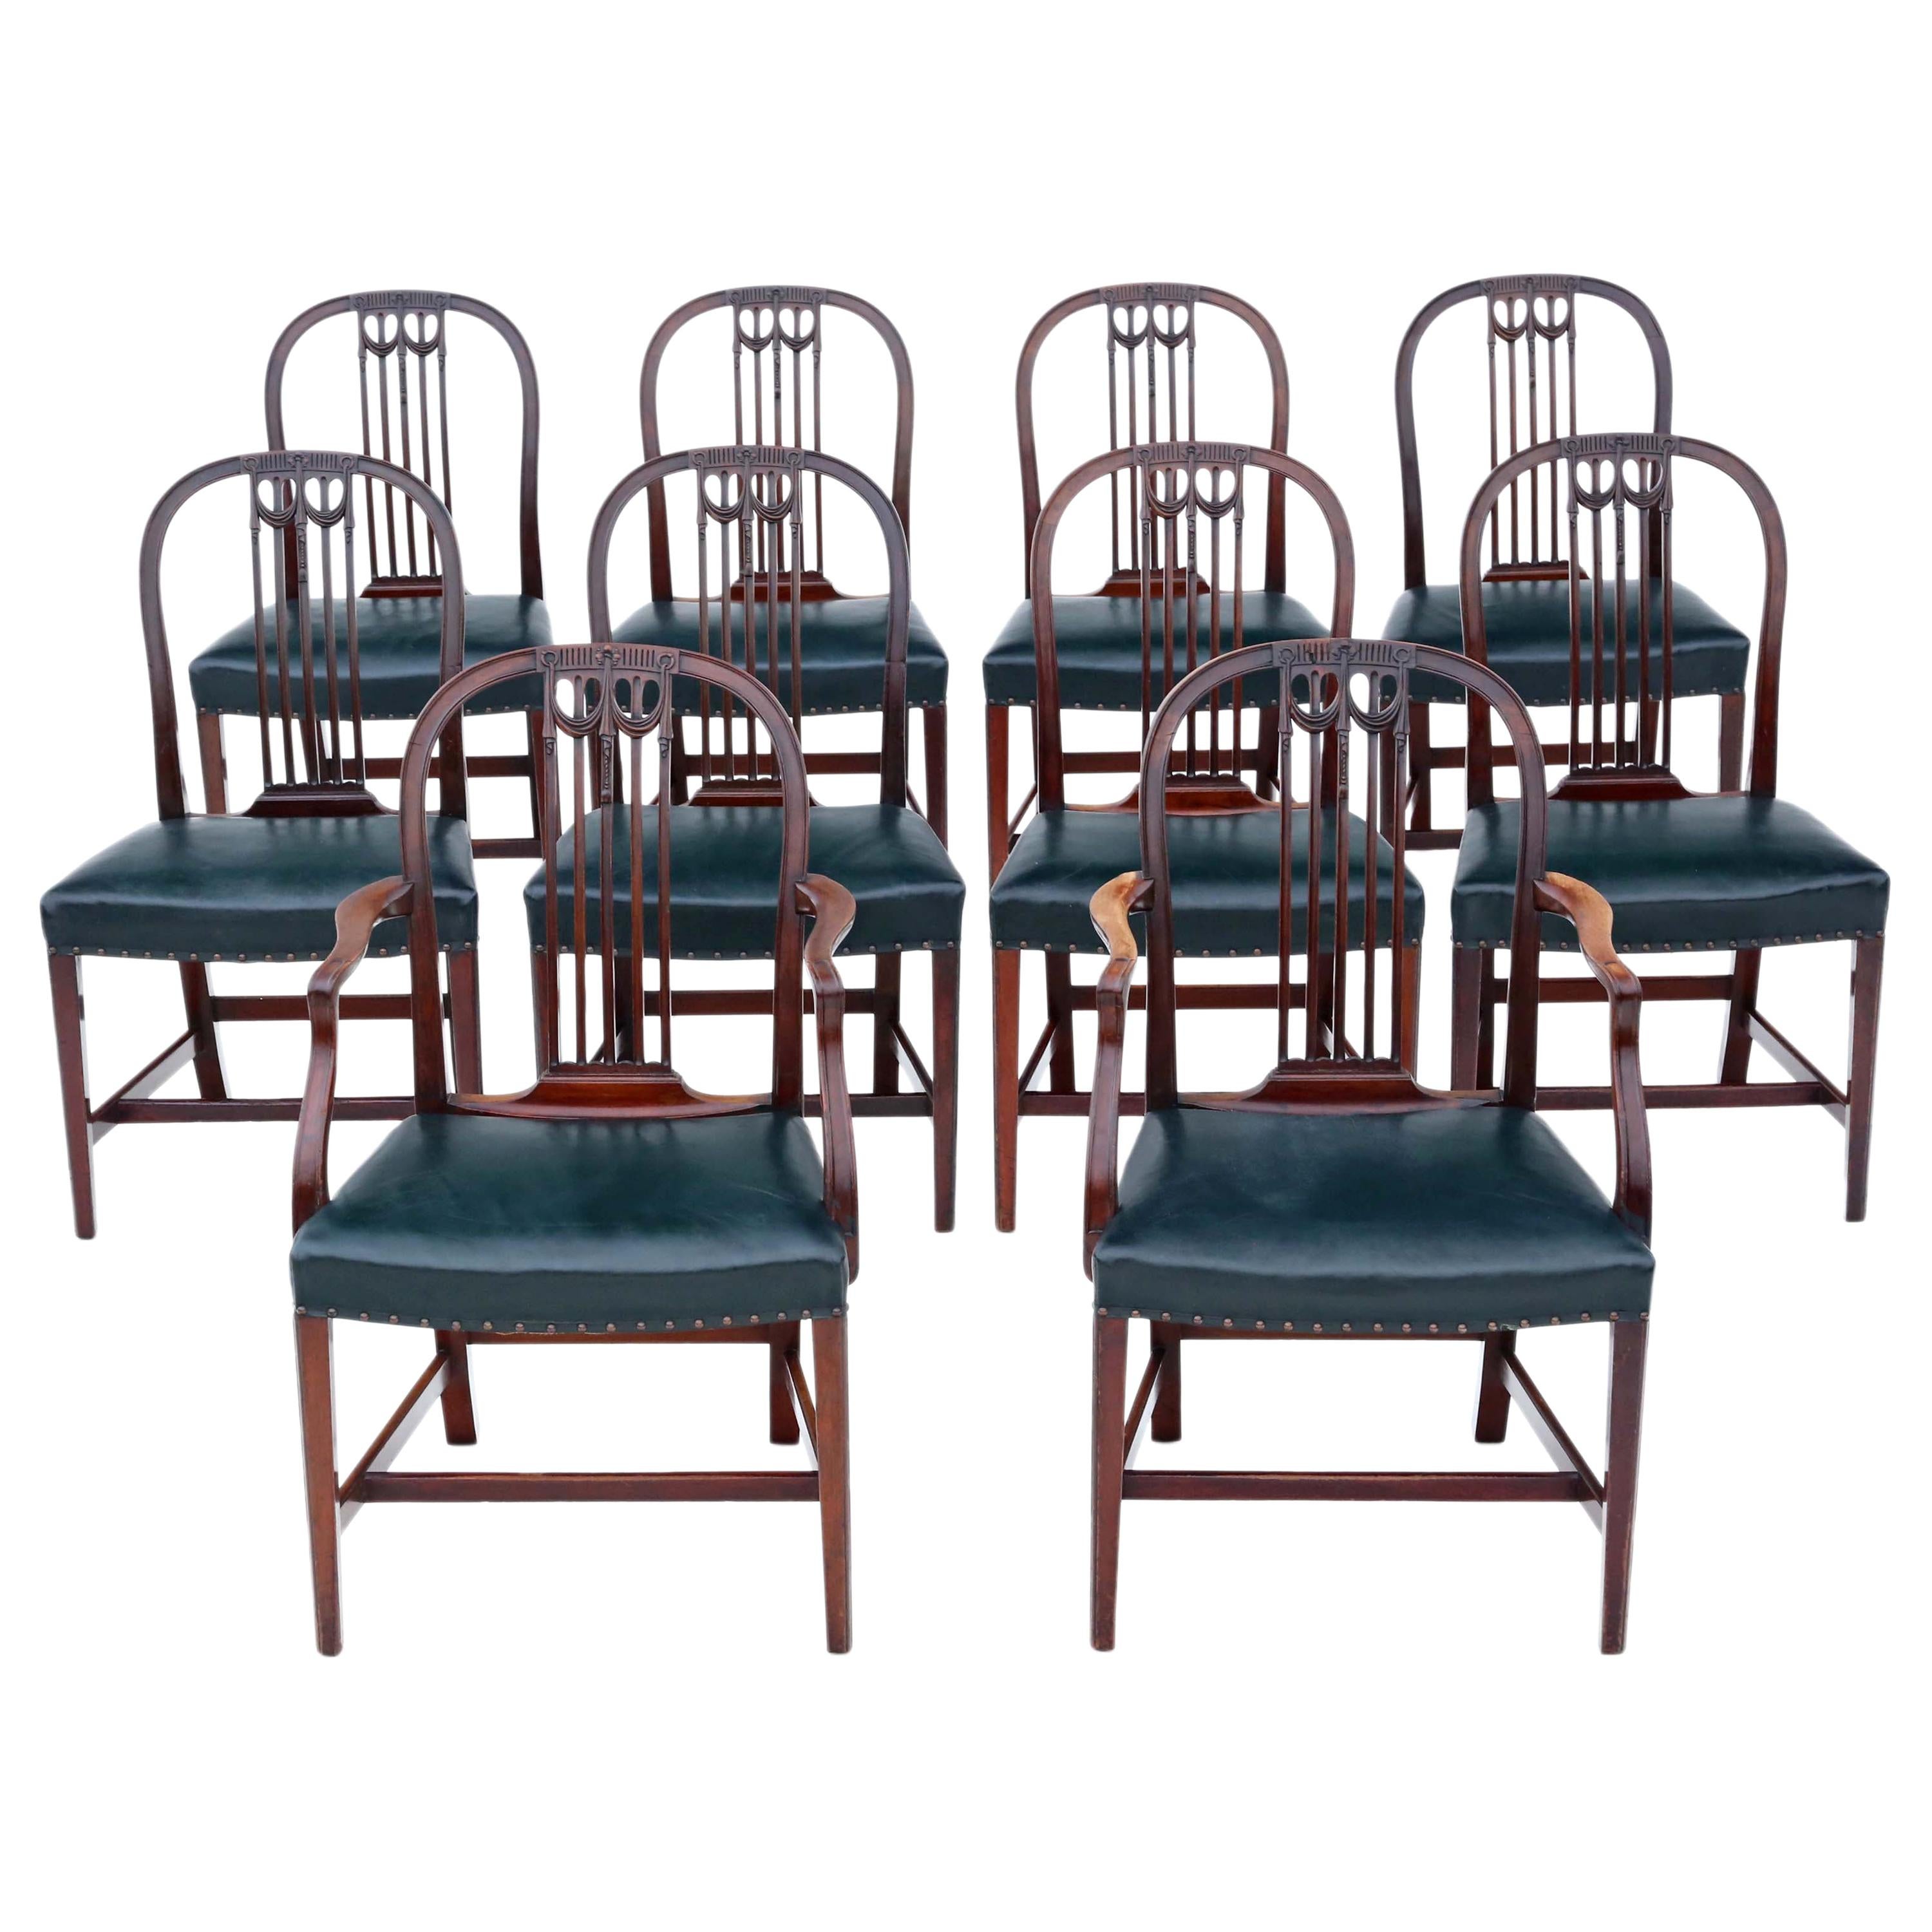 Antique Set of 10 '8+2' Mahogany Dining Chairs, 19th Century